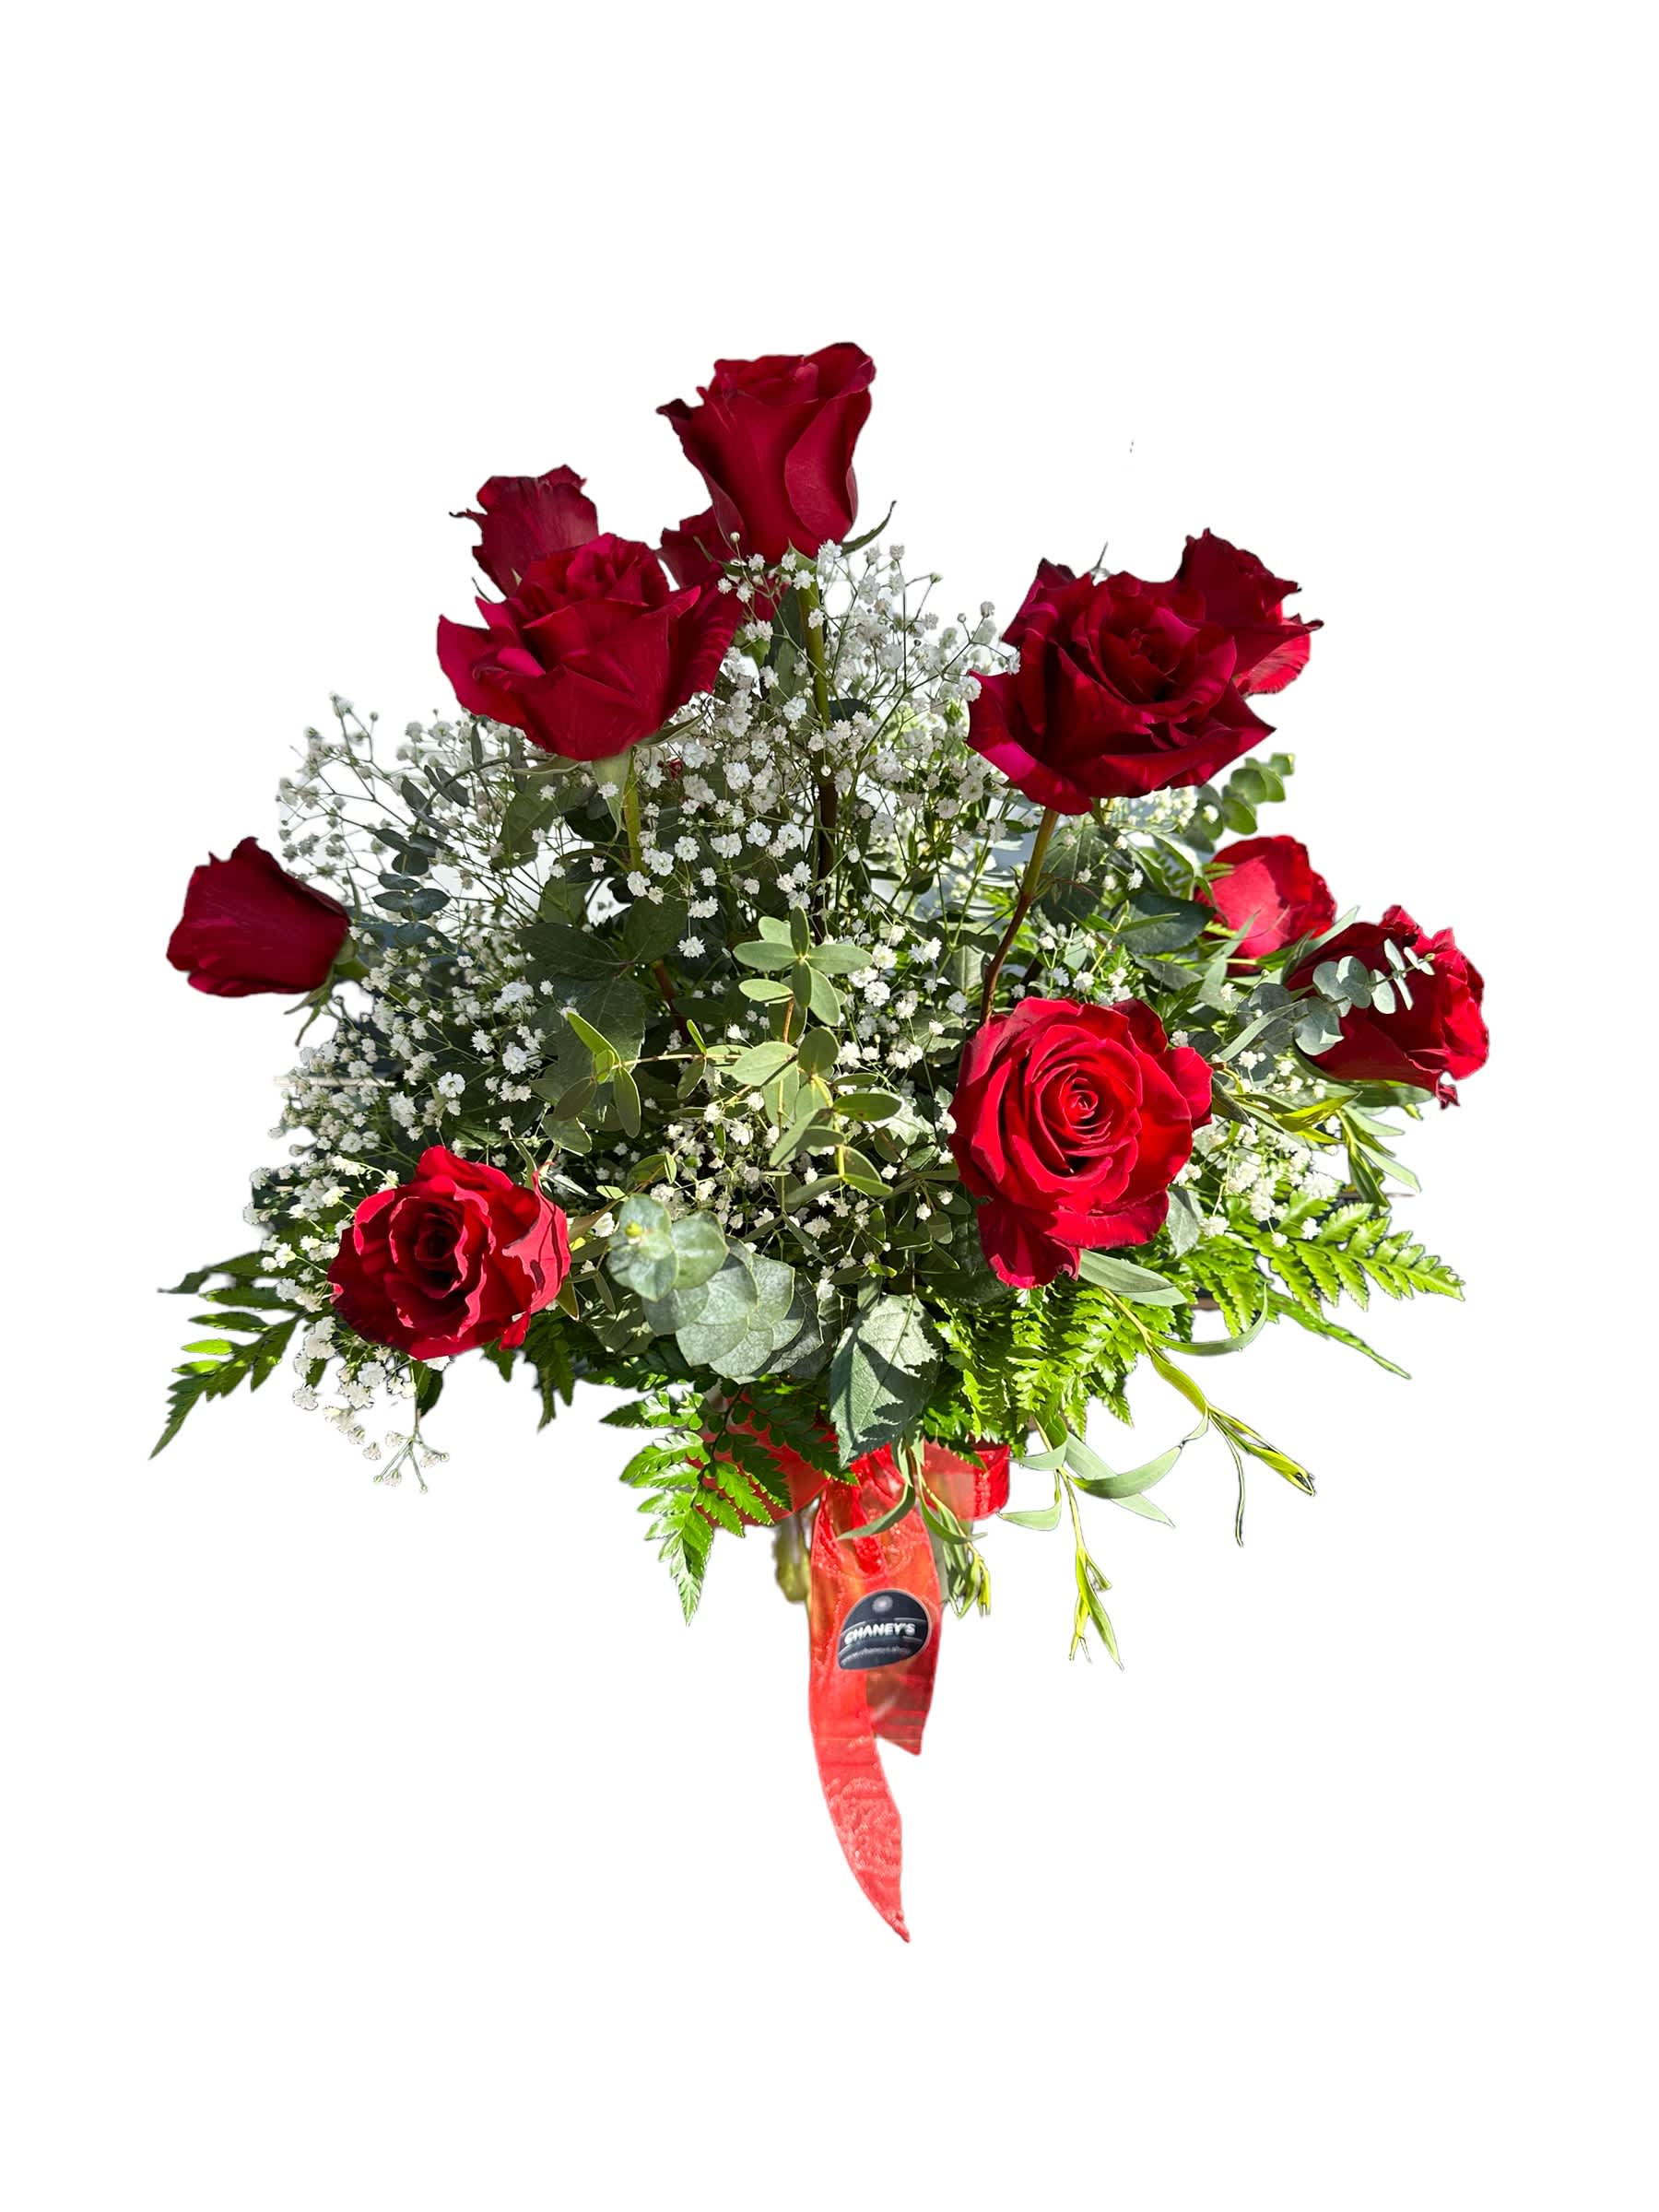 Chaney´s Red Romance 1004 (a dozen red roses) - Simple and straight expression of love with this hand made arrangement of 12 long stem red roses with expectional heads. Enjoy our queen of roses! The best quality you can get - always fresh from our growers!